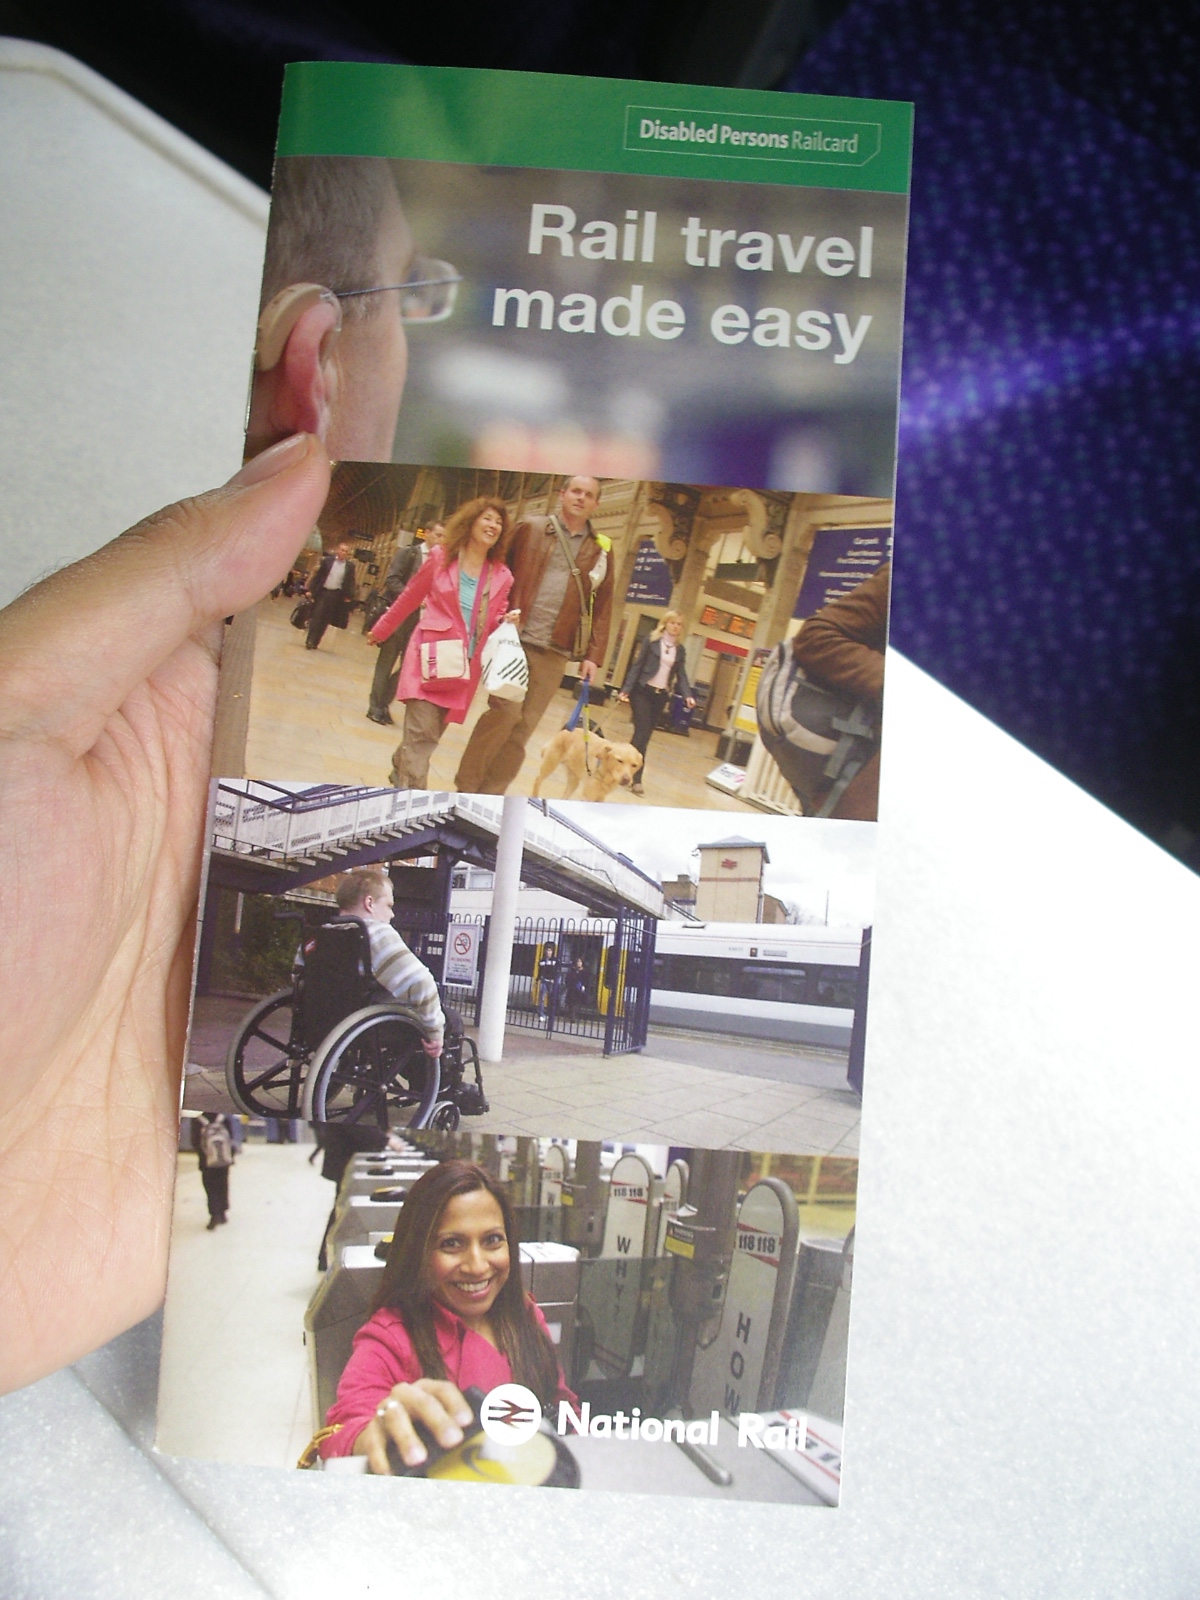 <Disabled Persons Railcard> flyer by UK National Rail